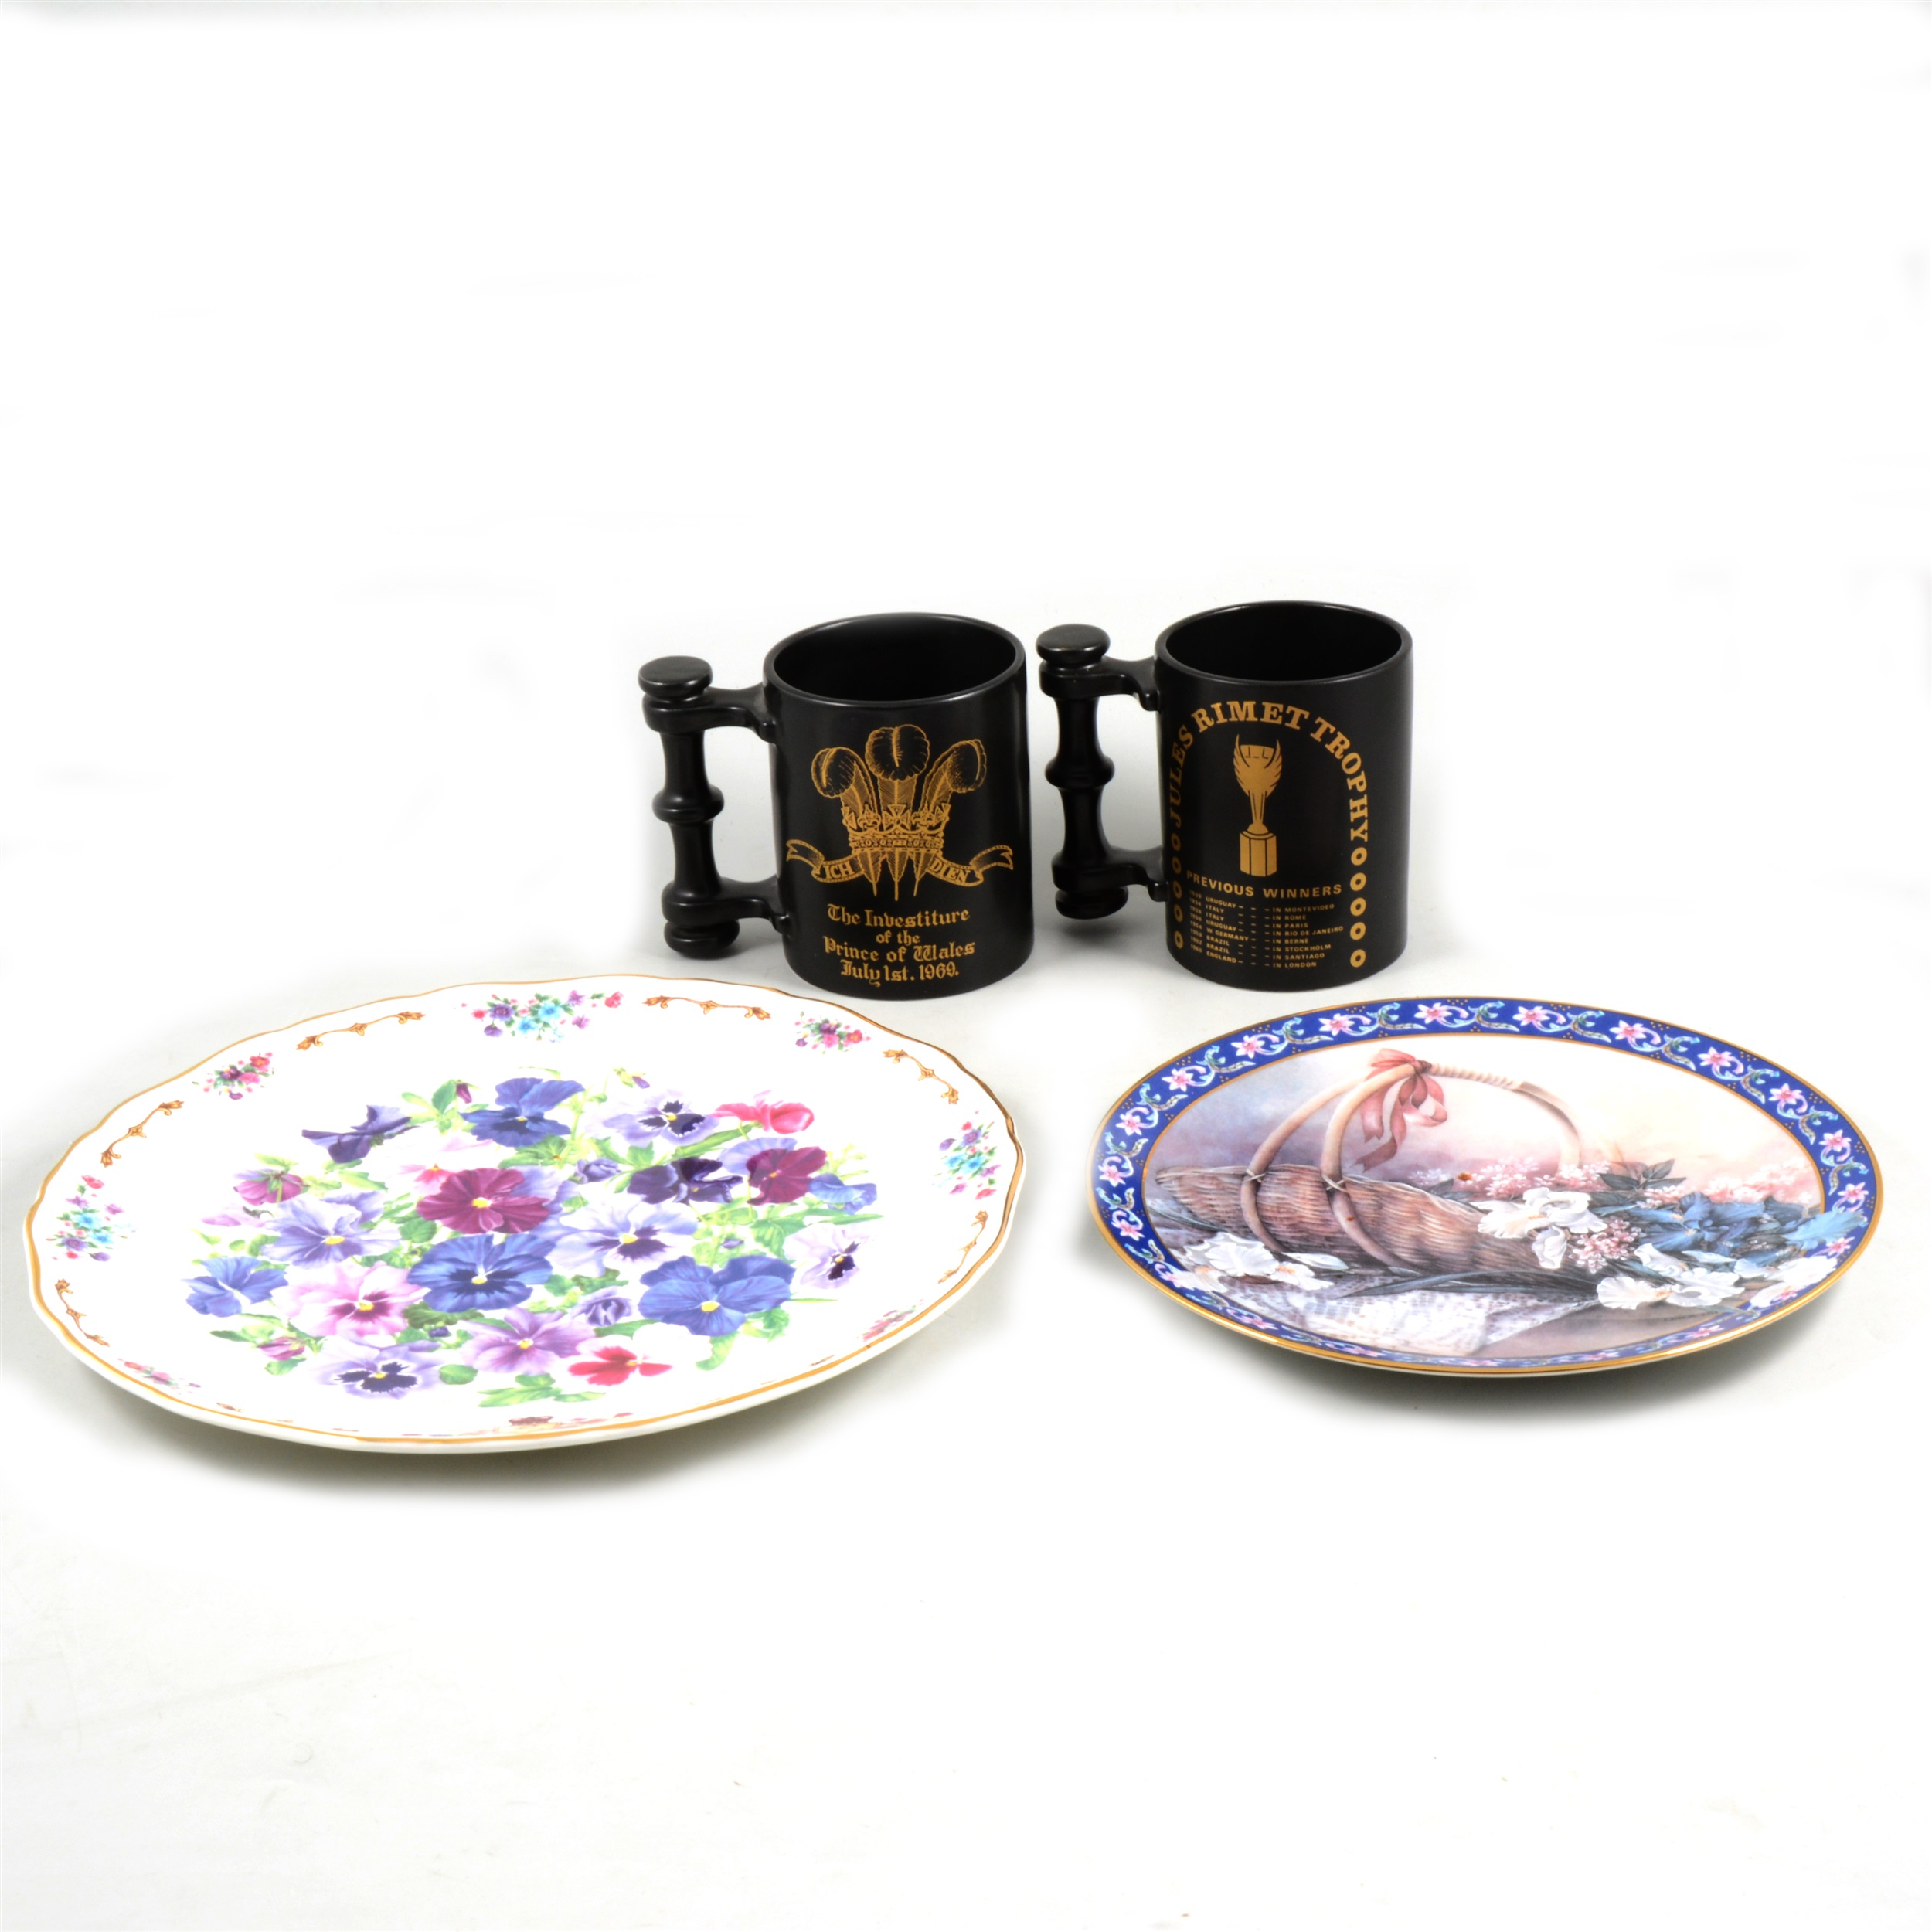 Two sets of four limited edition plates and four Portmeirion mugs